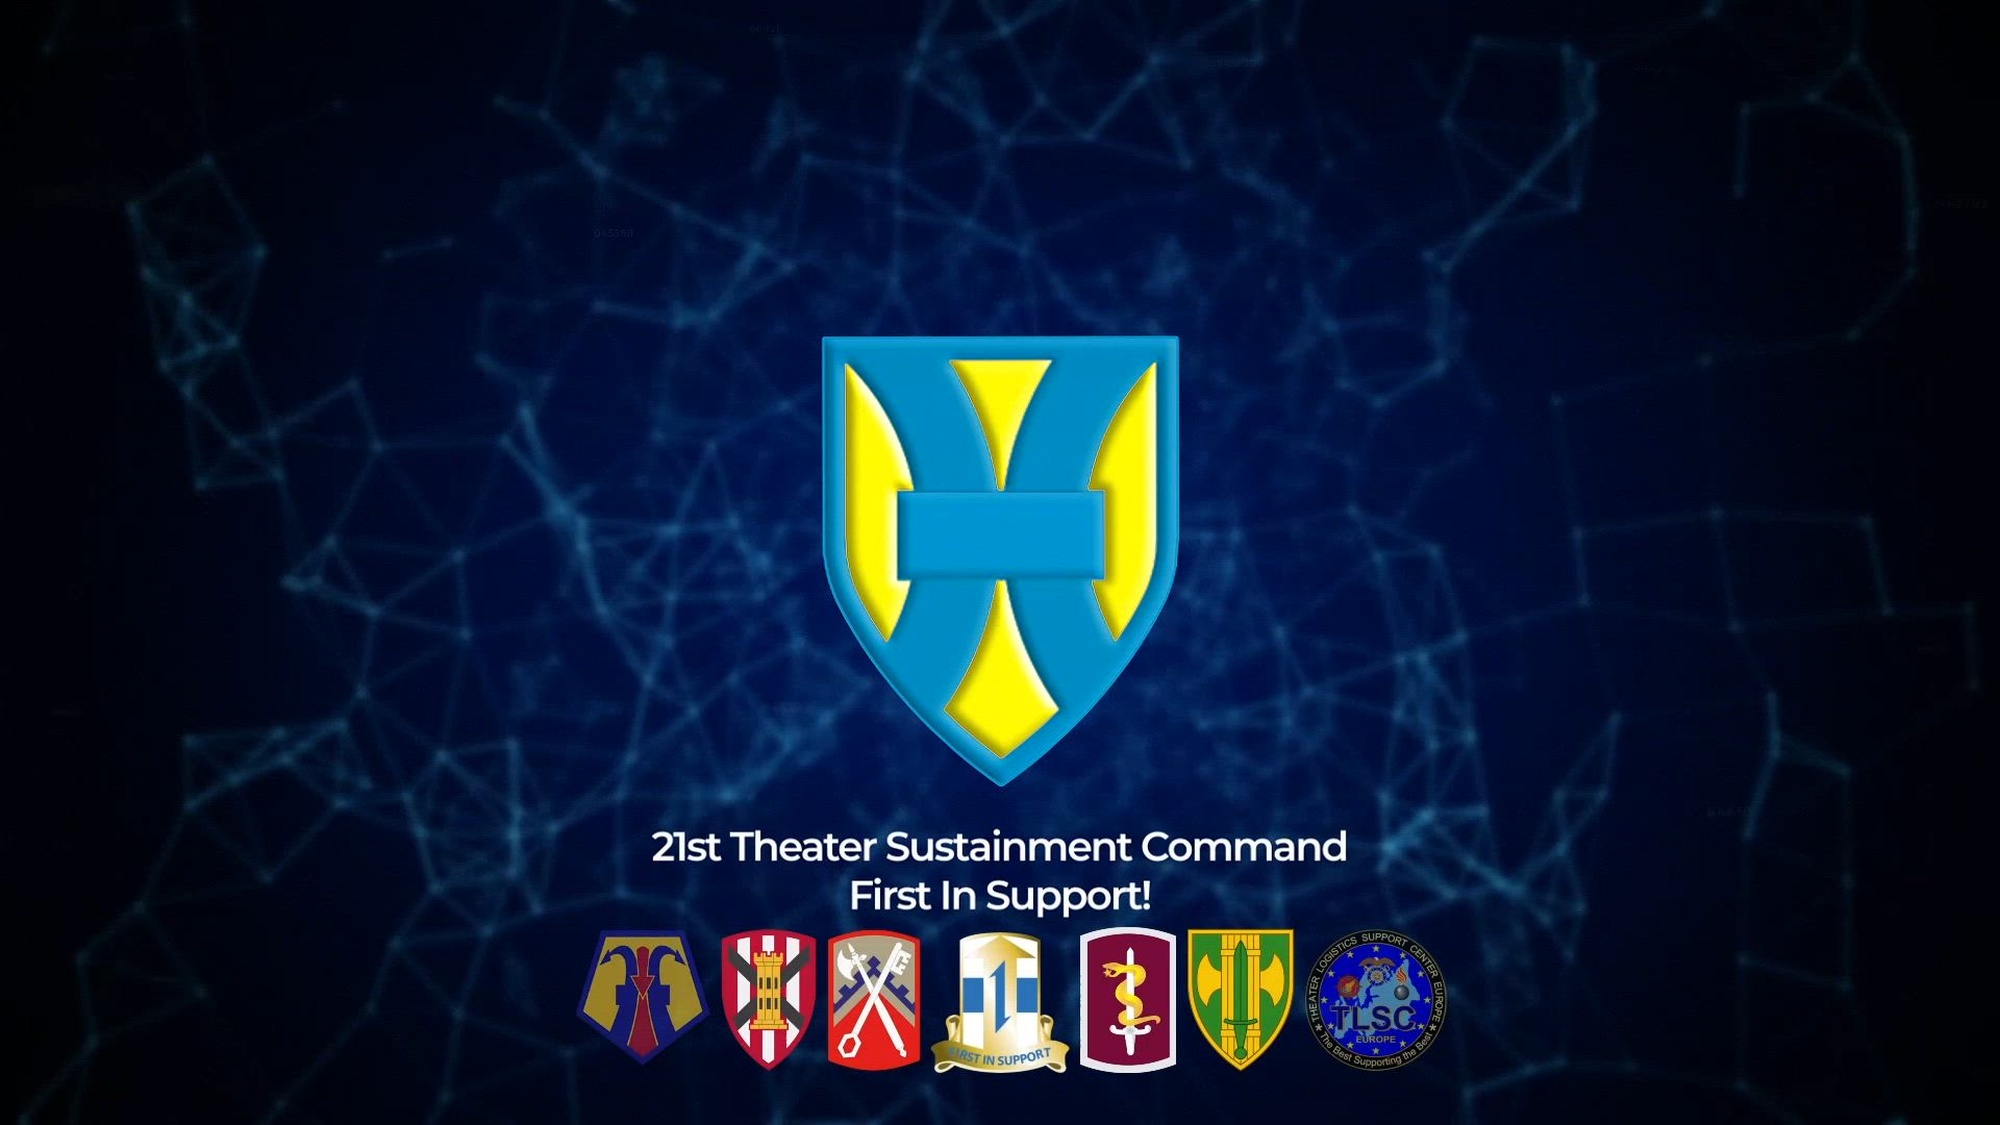 21st Theater Sustainment Command “Who We Are”